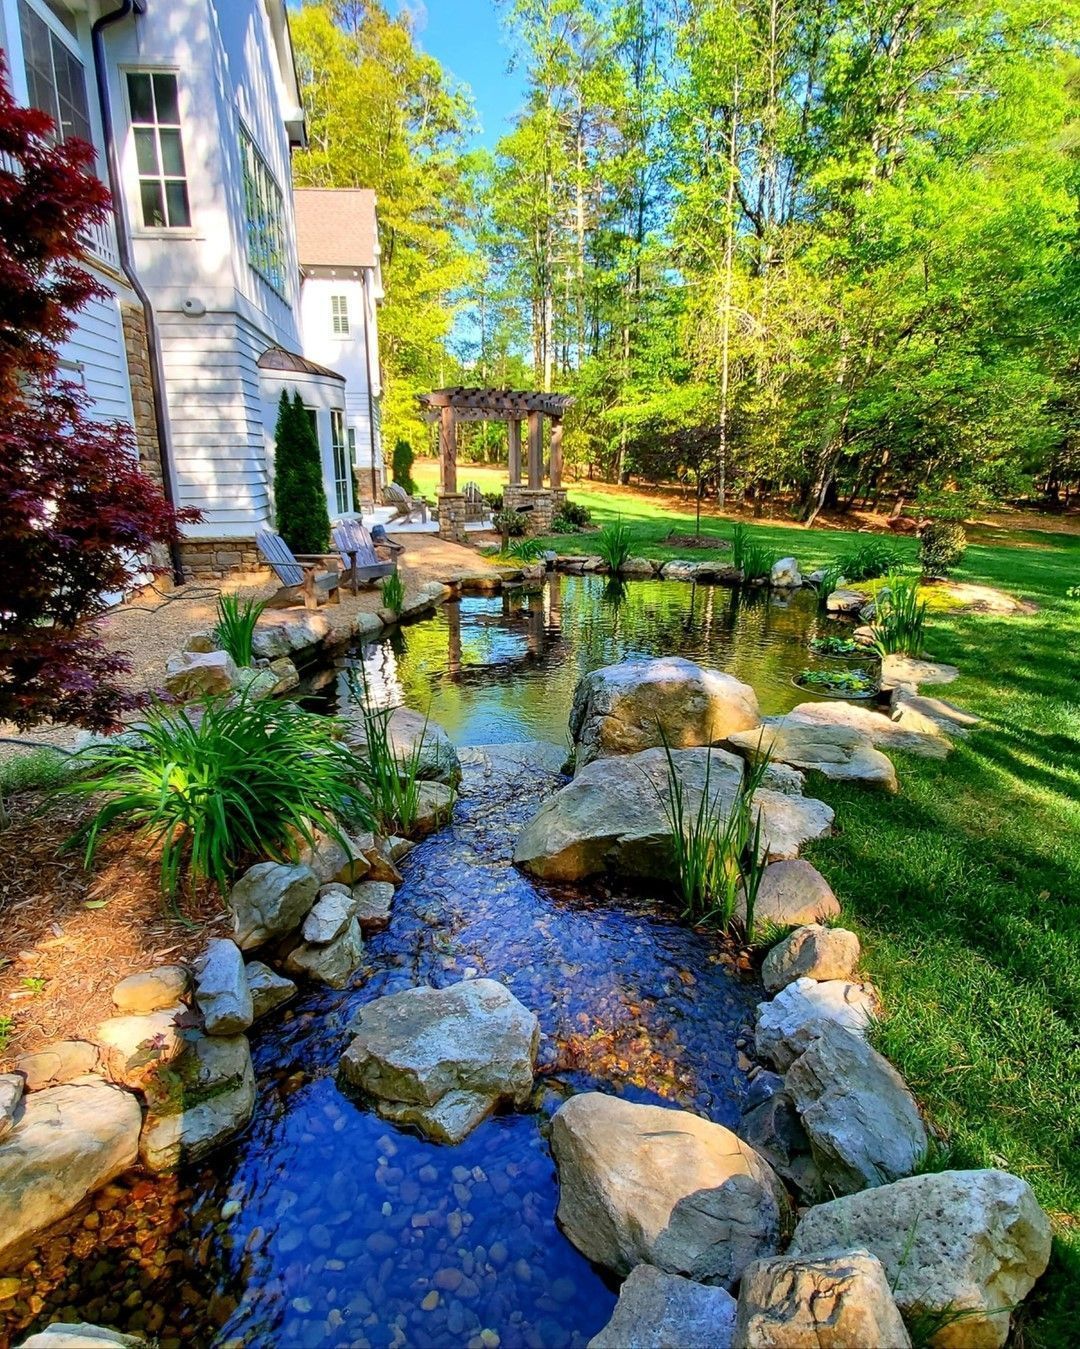 Creating Tranquility: The Beauty of Backyard Ponds